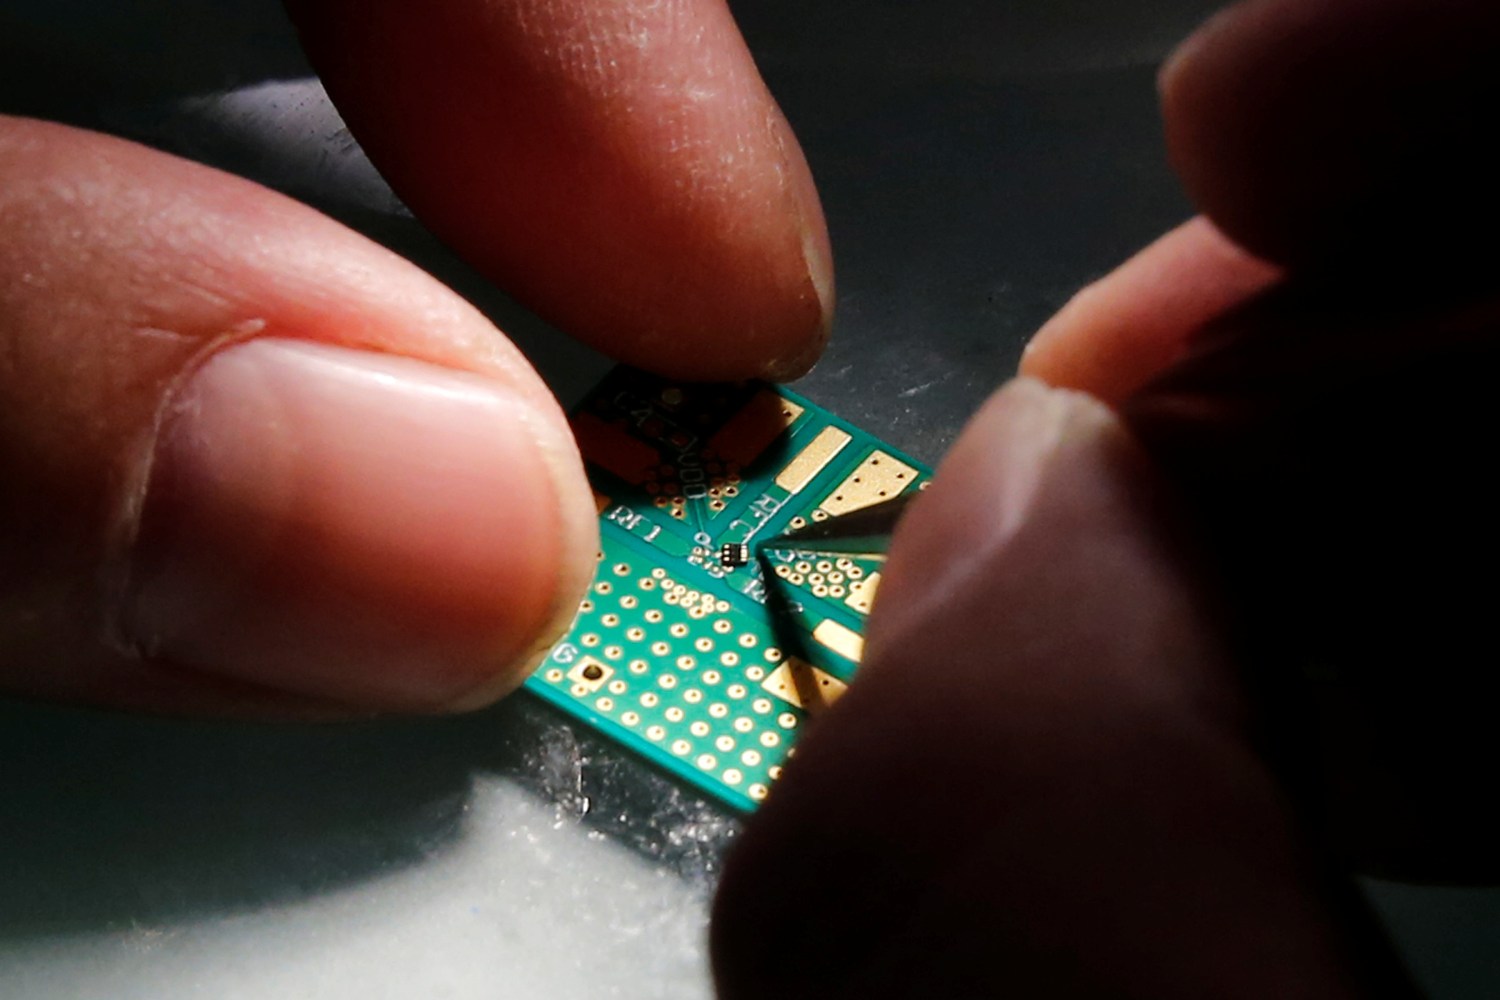 A researcher plants a semiconductor on an interface board during a research work to design and develop a semiconductor product at Tsinghua Unigroup research centre in Beijing, China, February 29, 2016.  REUTERS/Kim Kyung-Hoon  - D1AETETVAHAA